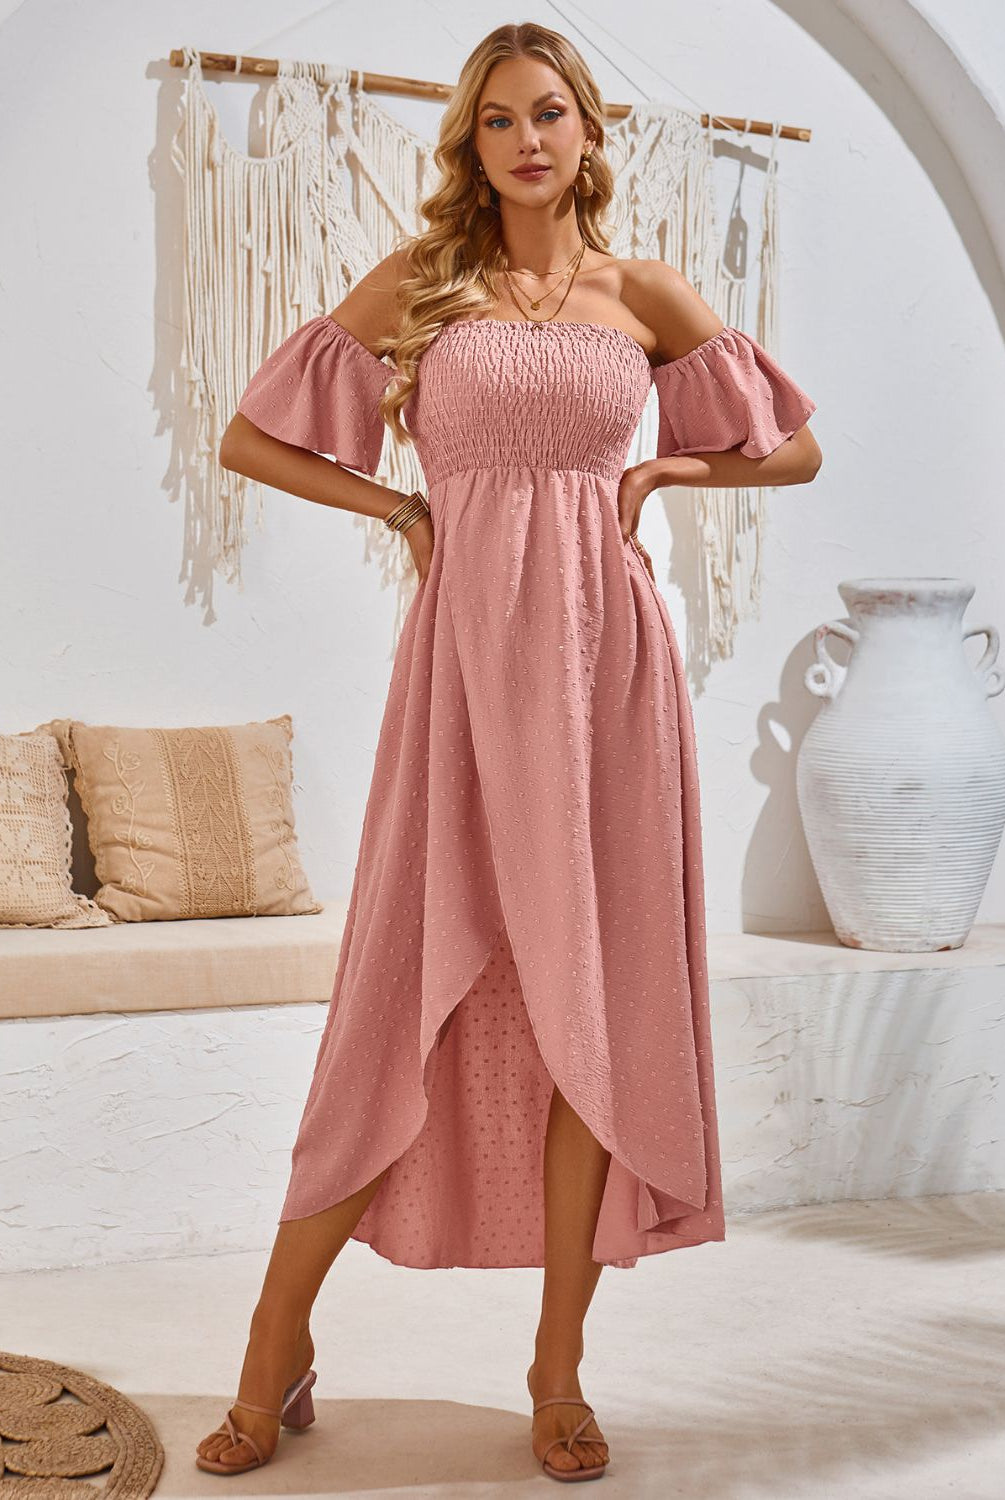 Woman in a chic pale blush smocked midi dress with a high-low hem, perfect for a summer day.